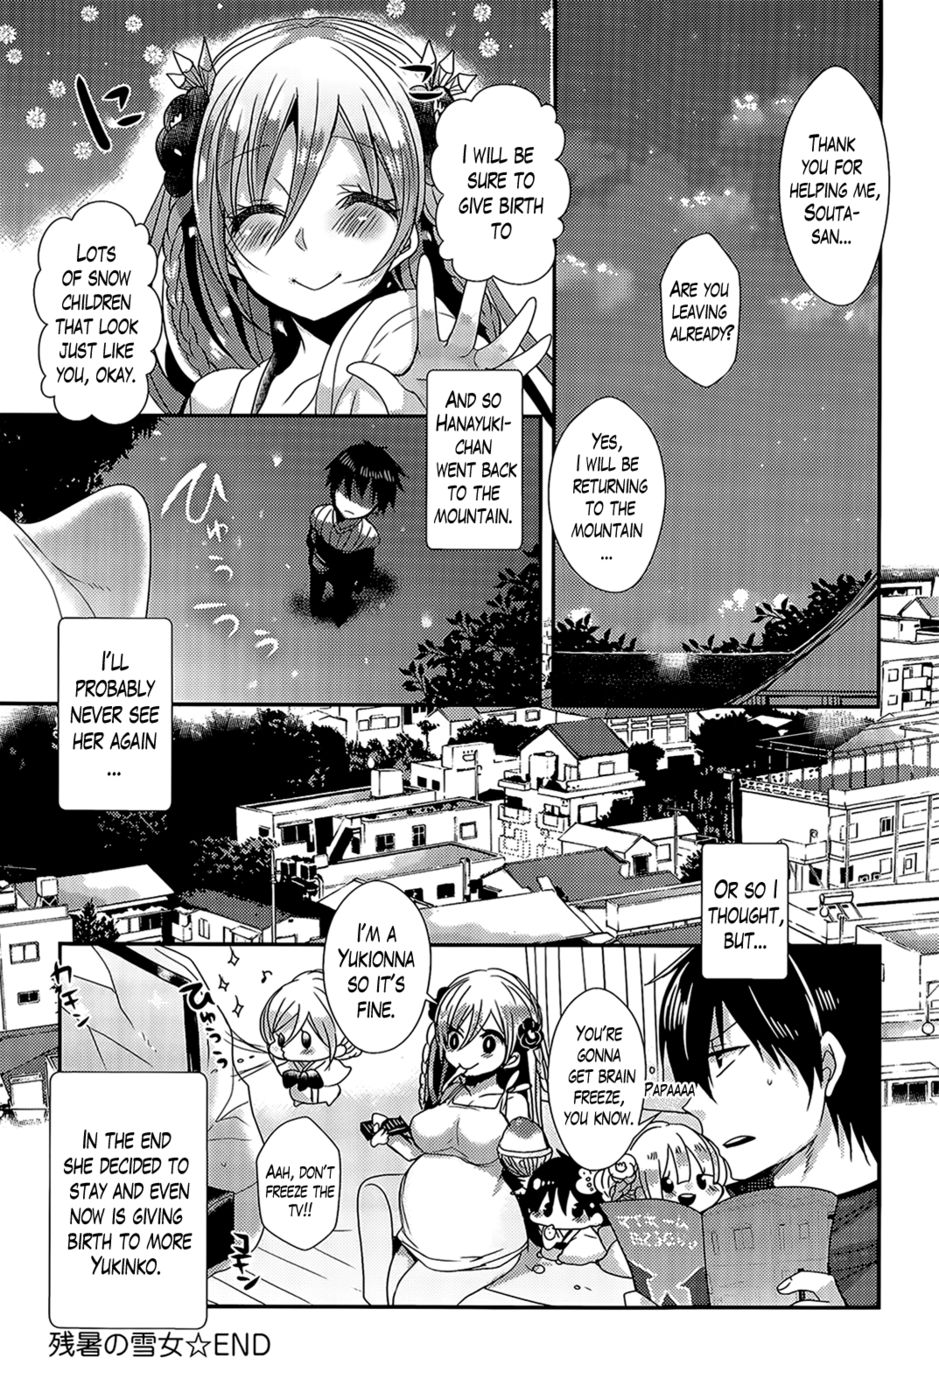 The Yukionna in the Lingering Summer Heat-Read-Hentai Manga Hentai Comic -  Page: 20 - Online porn video at mobile